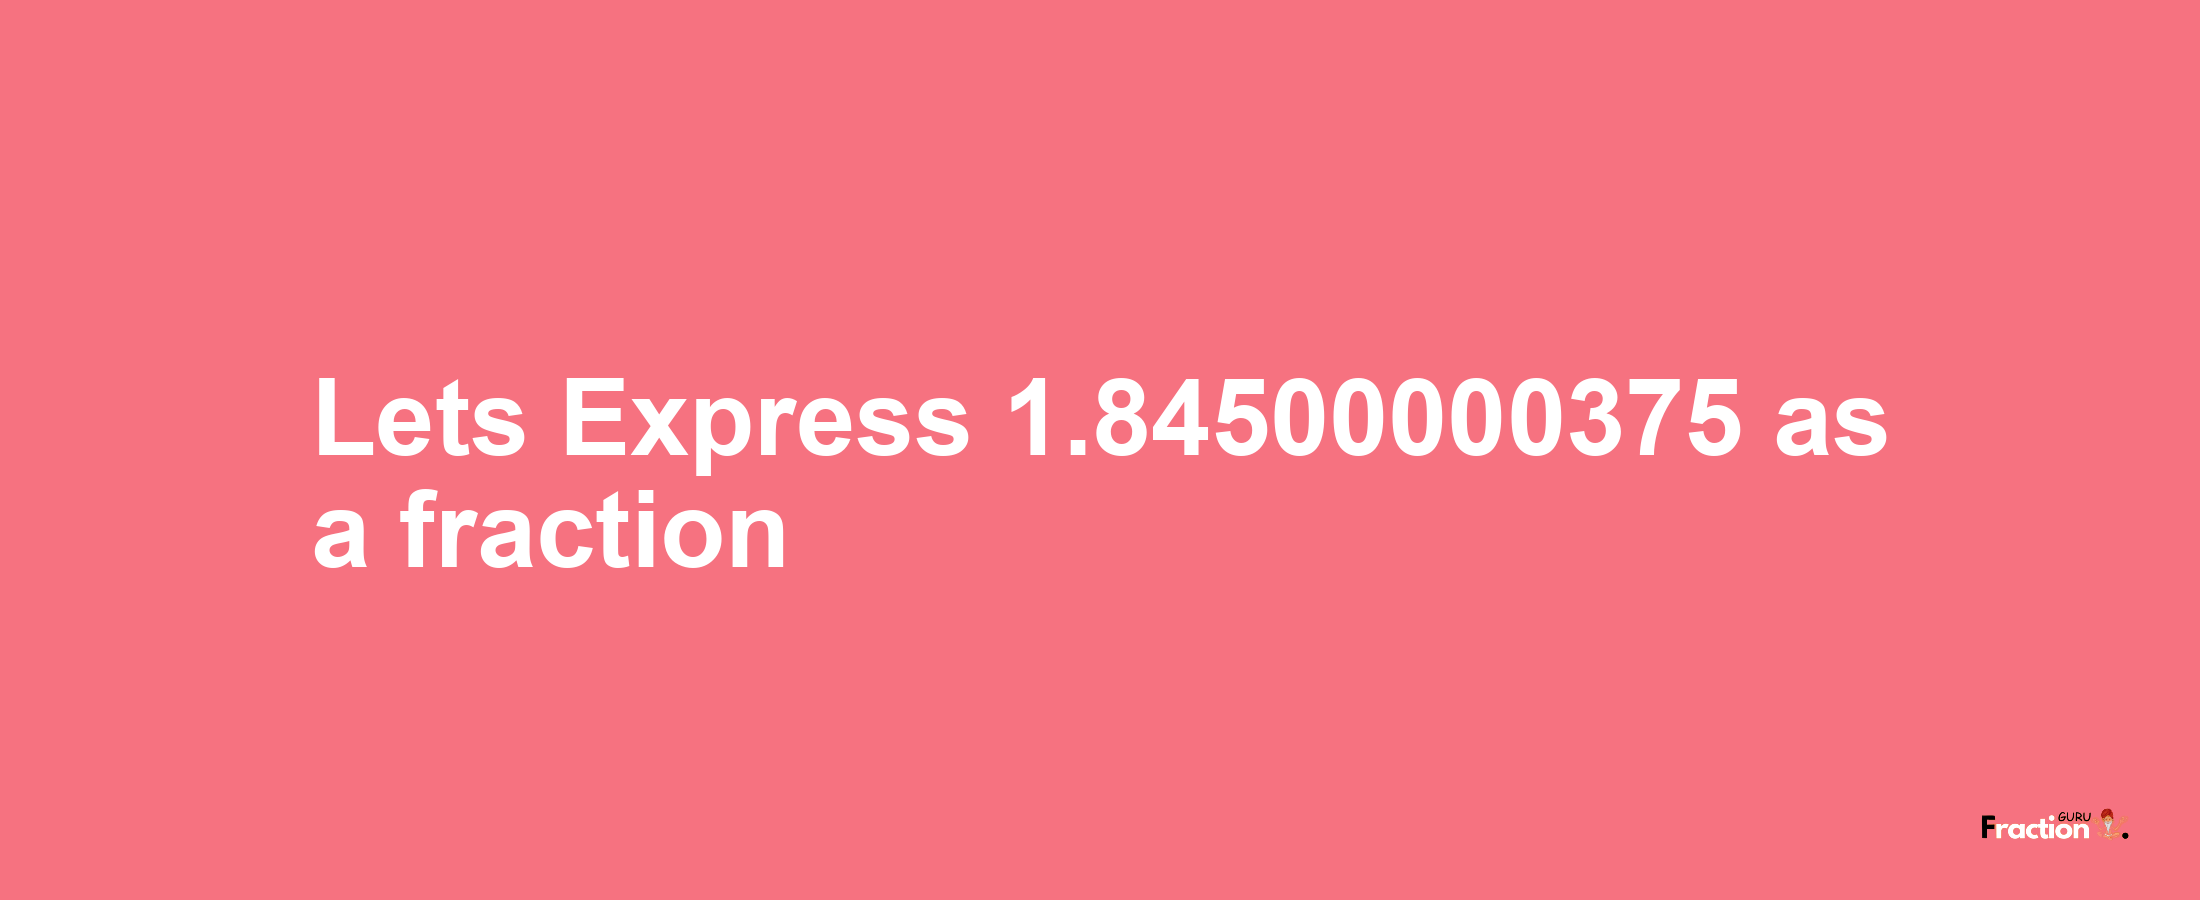 Lets Express 1.84500000375 as afraction